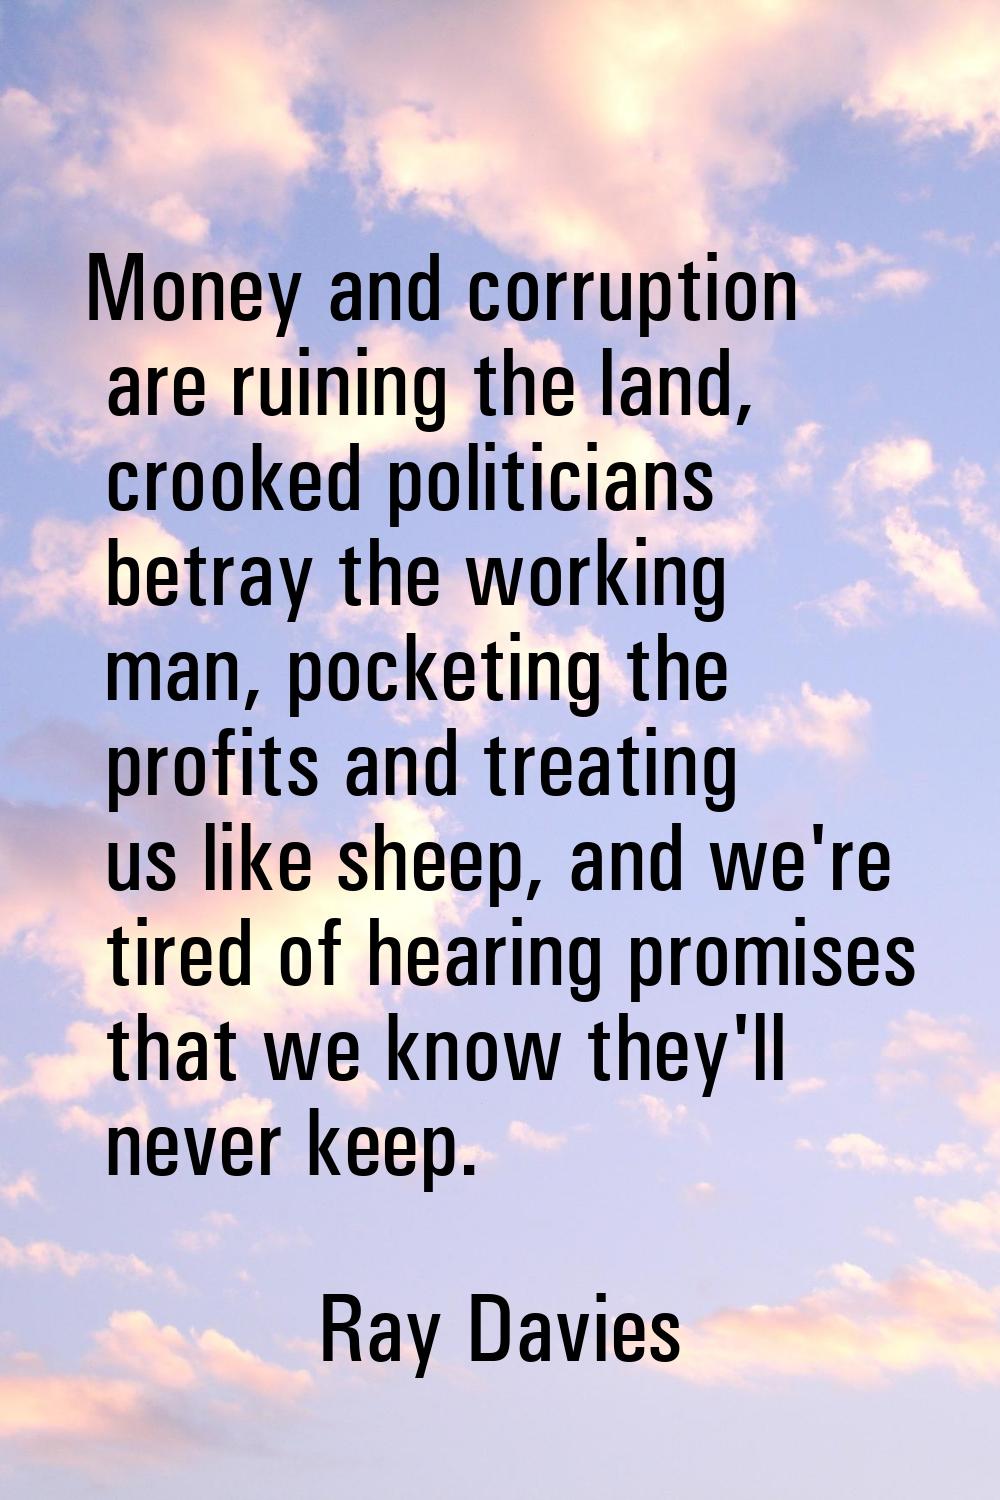 Money and corruption are ruining the land, crooked politicians betray the working man, pocketing th